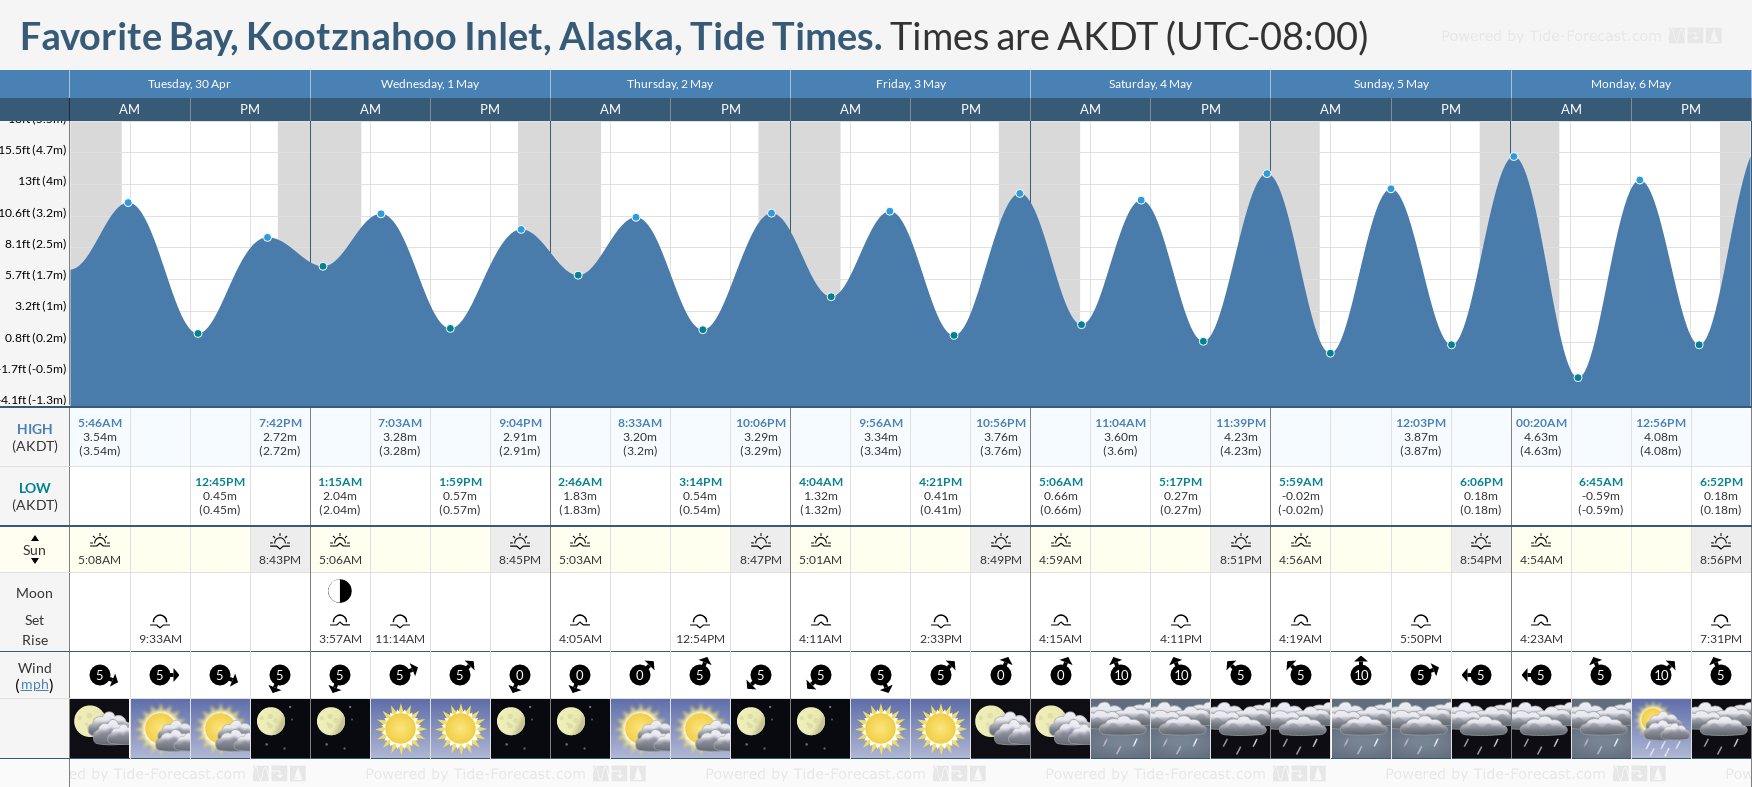 Favorite Bay, Kootznahoo Inlet, Alaska Tide Chart including high and low tide times for the next 7 days